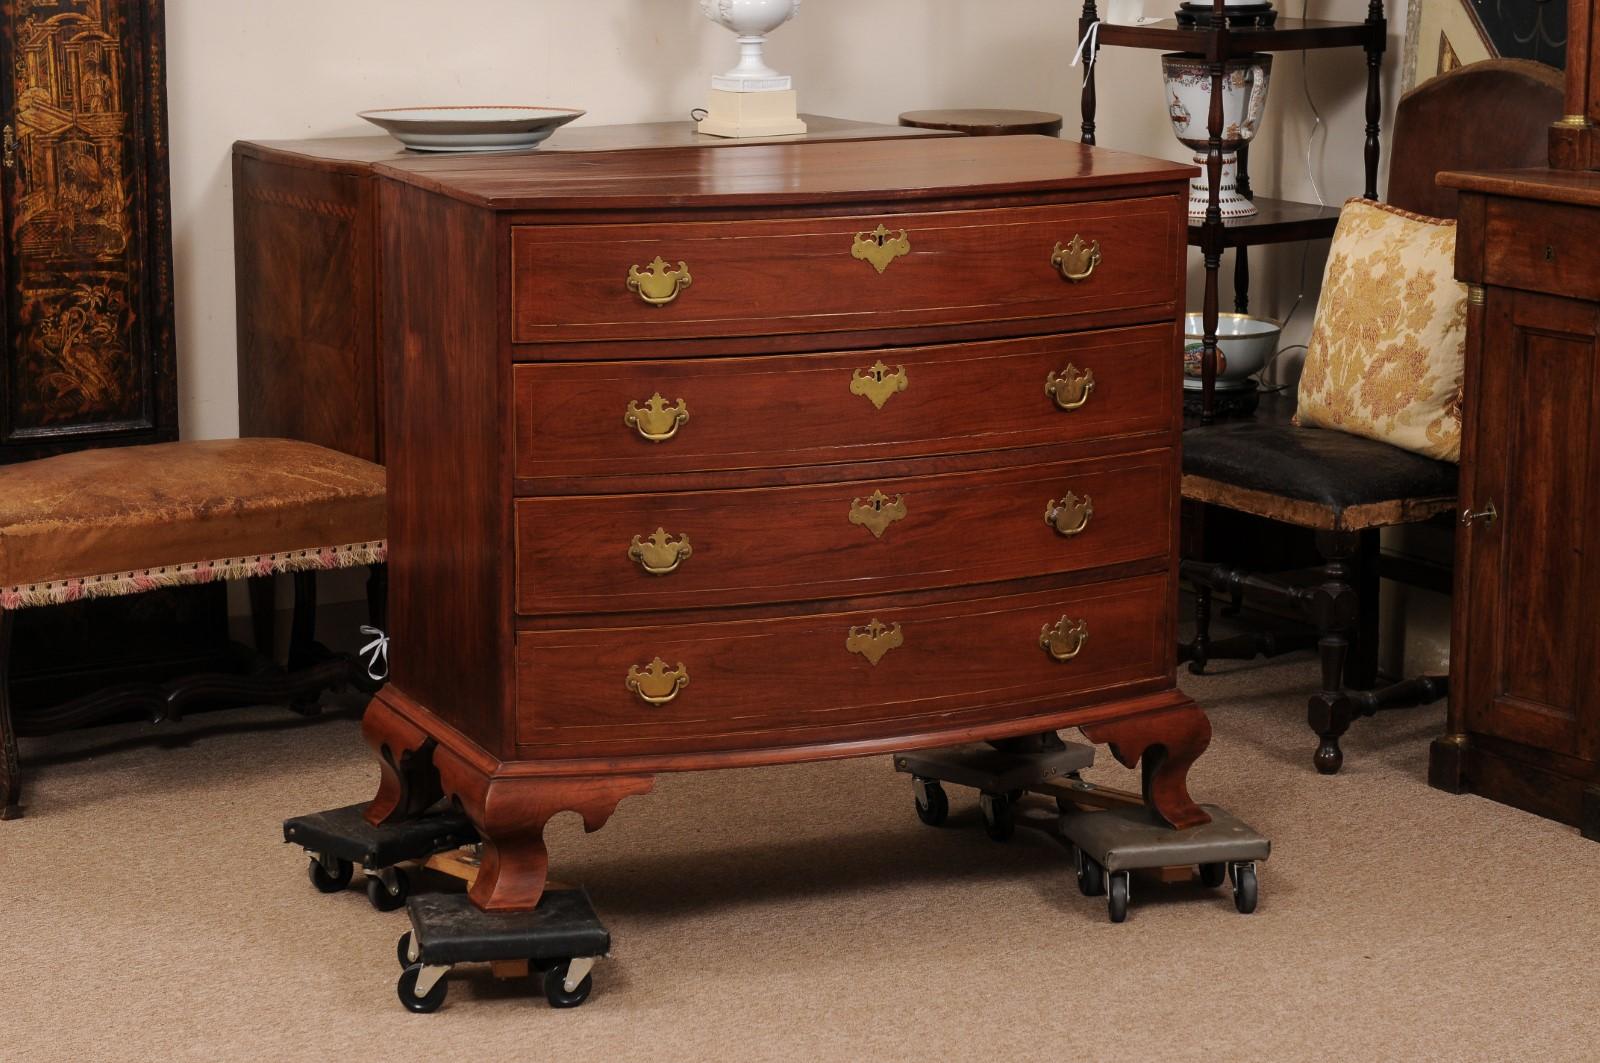  New England Cherry Bowfront Chest with Graduating 4 Drawers, String Inlay  In Good Condition For Sale In Atlanta, GA